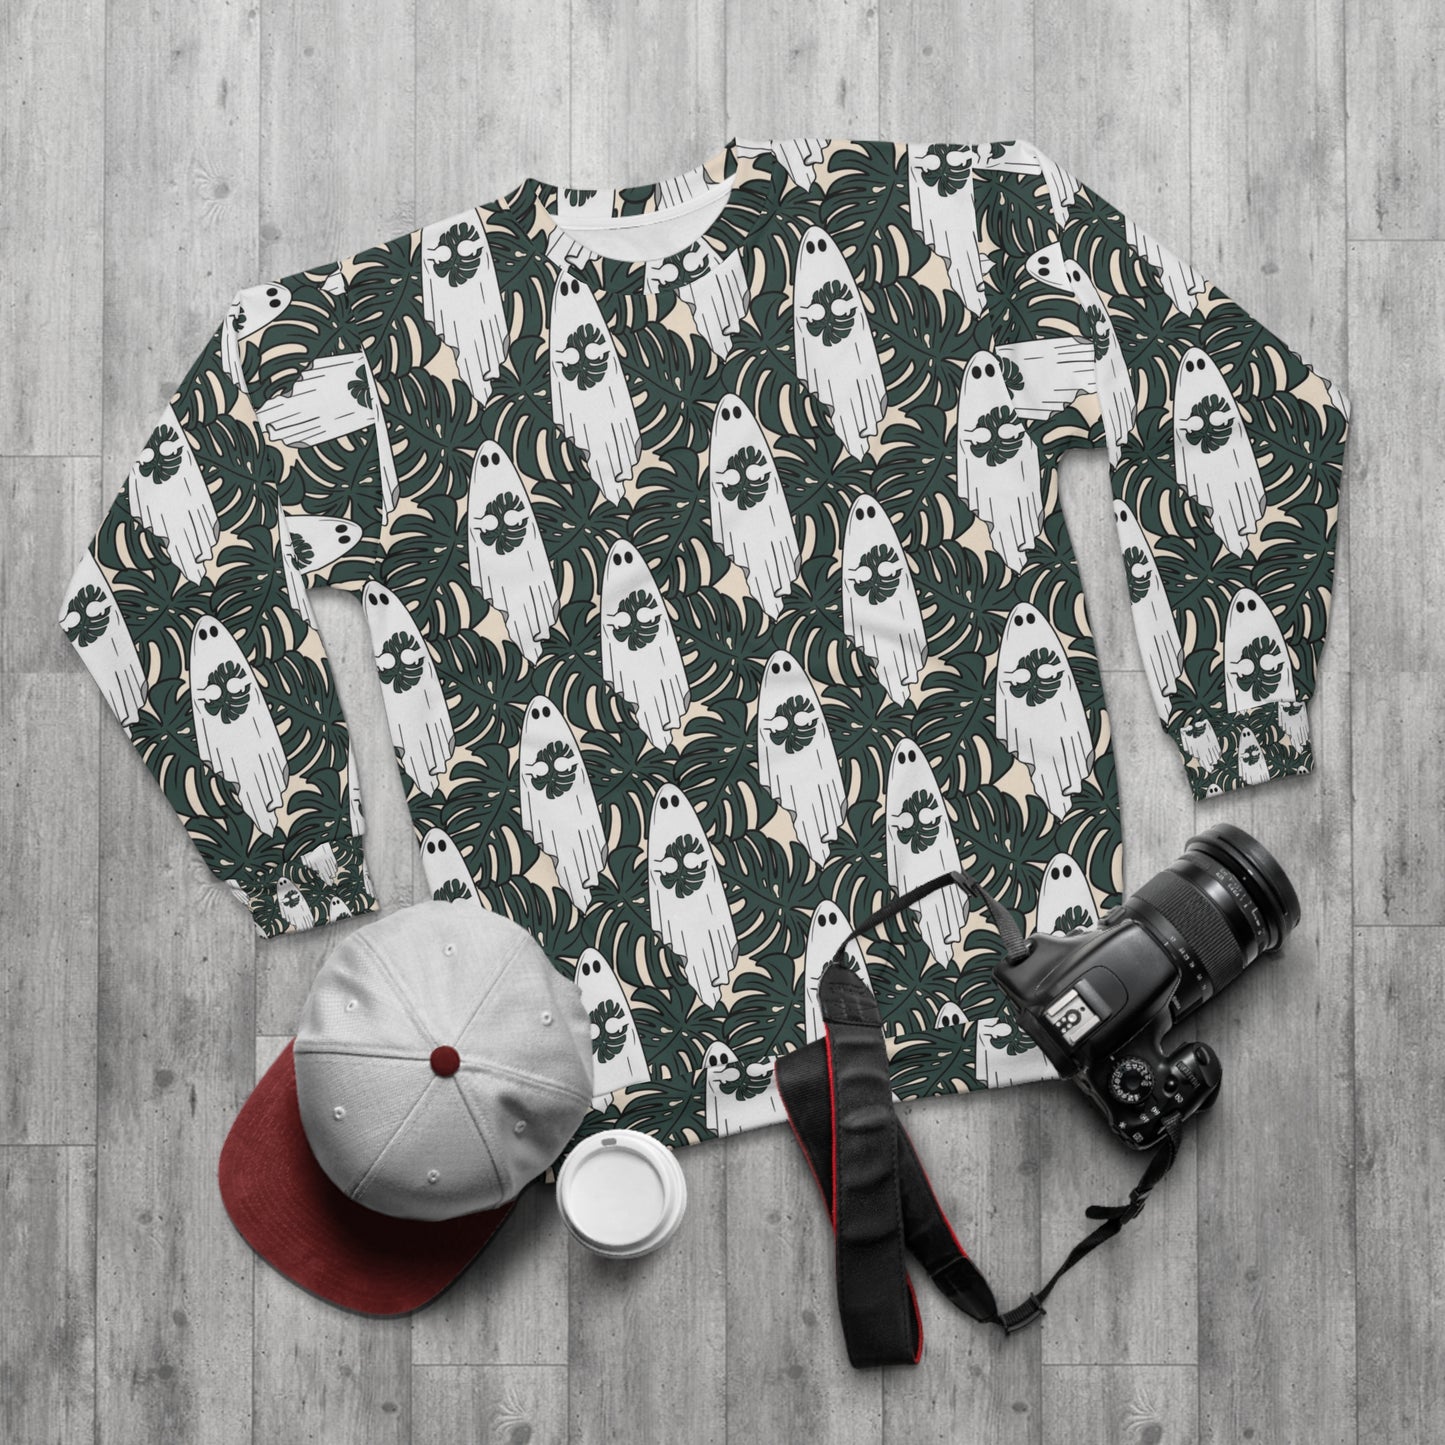 Monstera leaves and cute ghost Unisex Sweatshirt for plant lover and Halloween lover. LIMITED TIME.